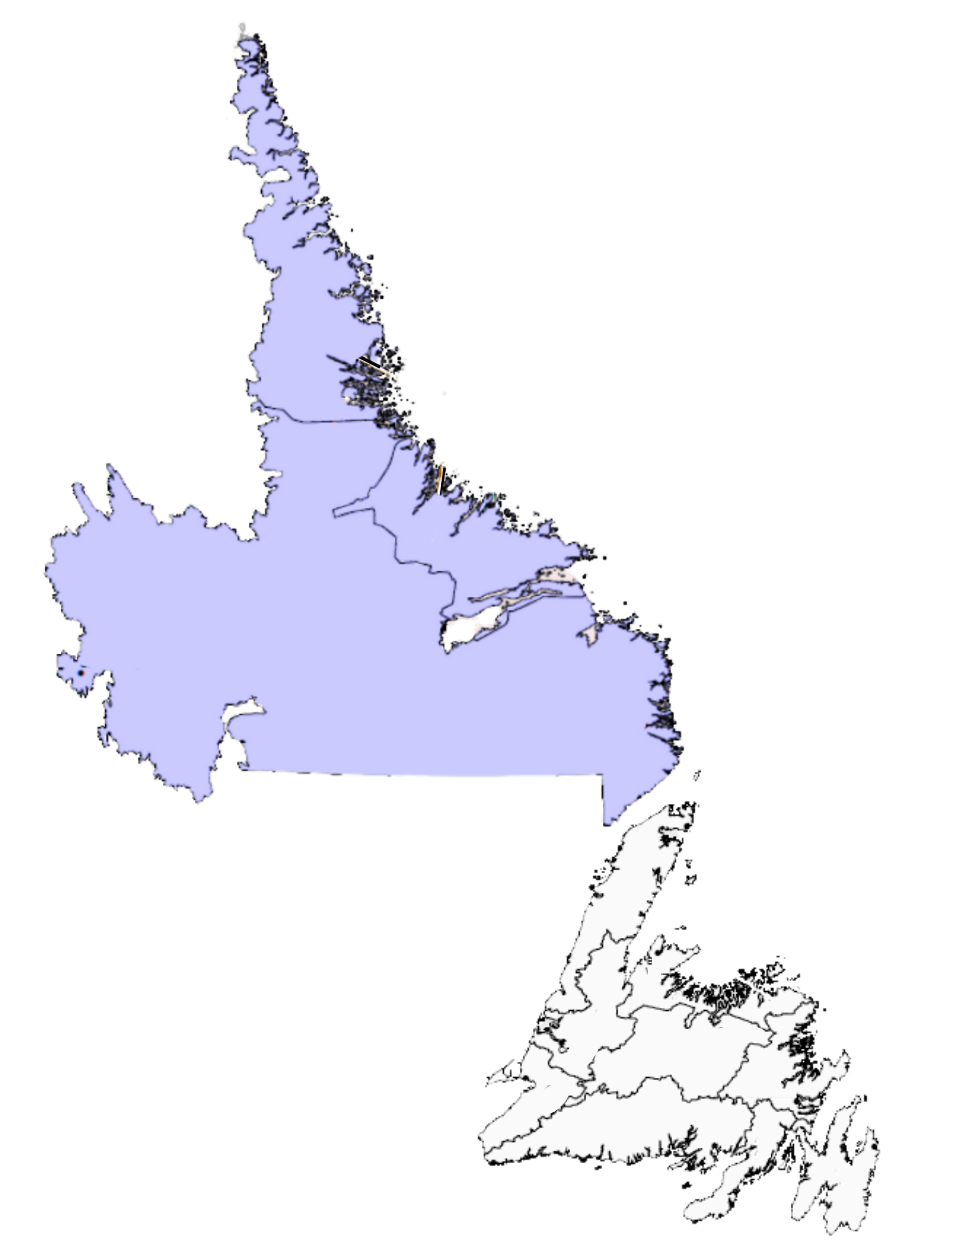 NL map with Labrador region highlighted